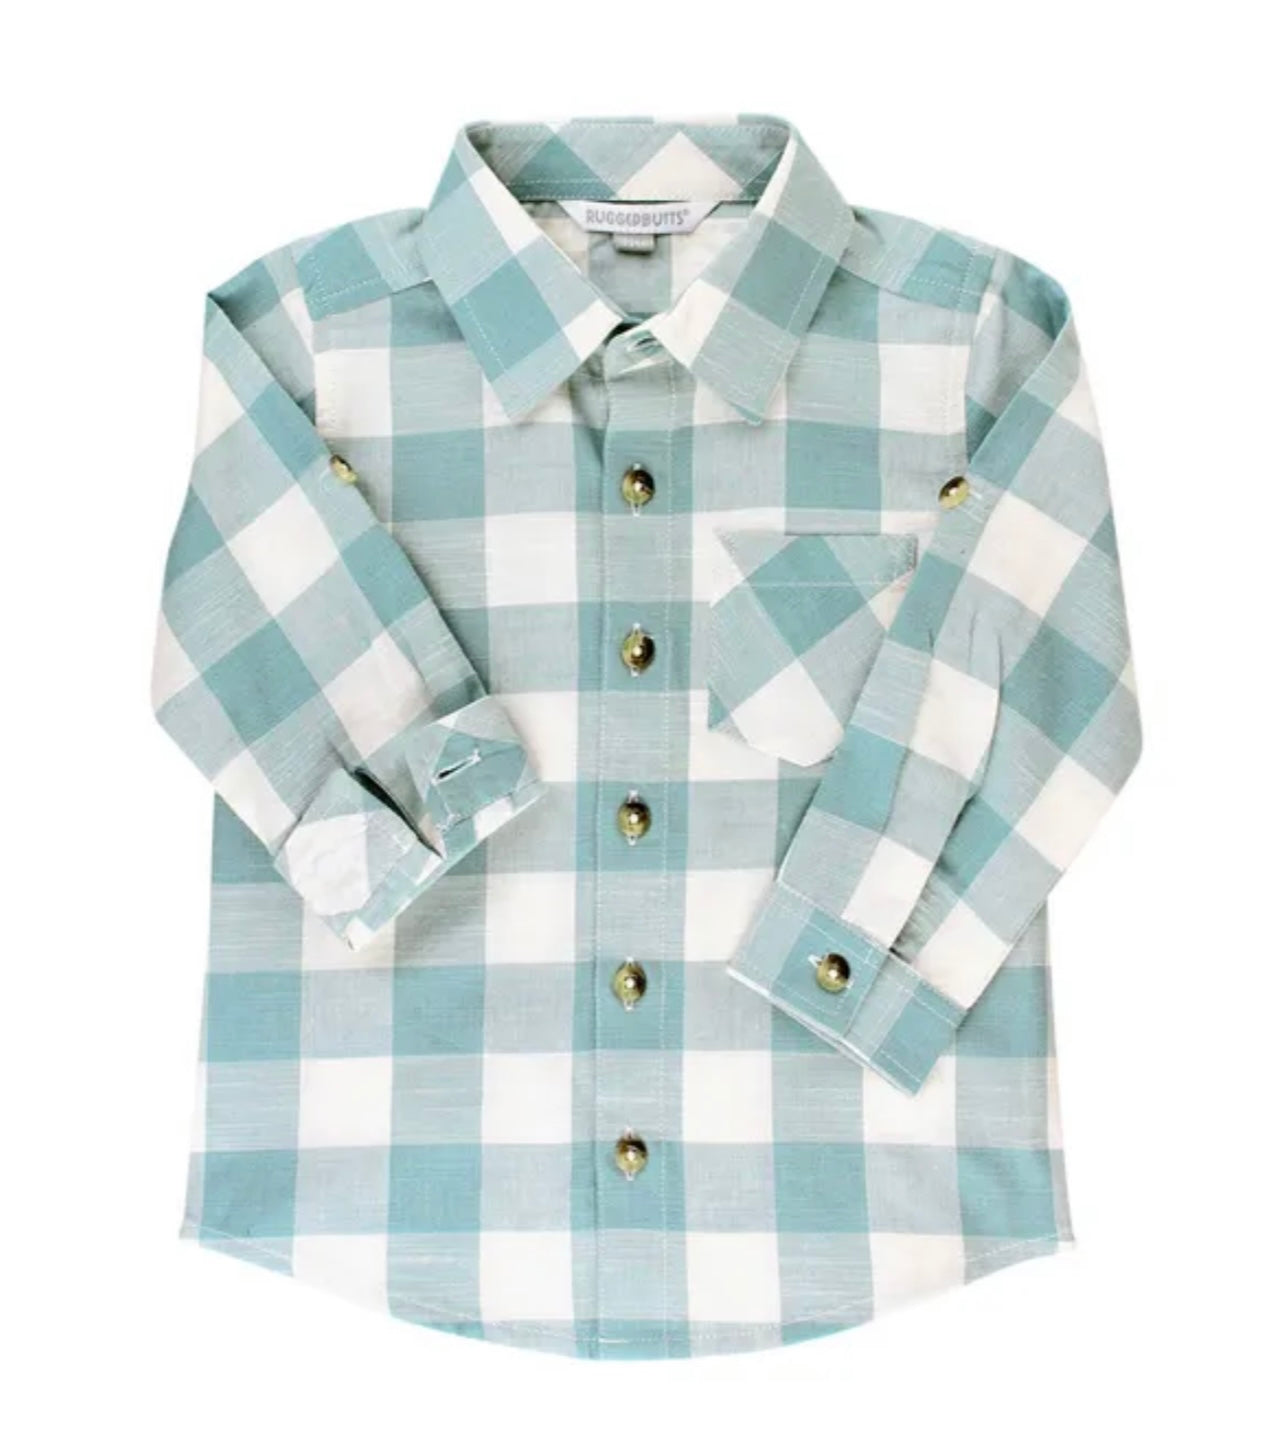 Rugged Butts Antique Plaid Button-up